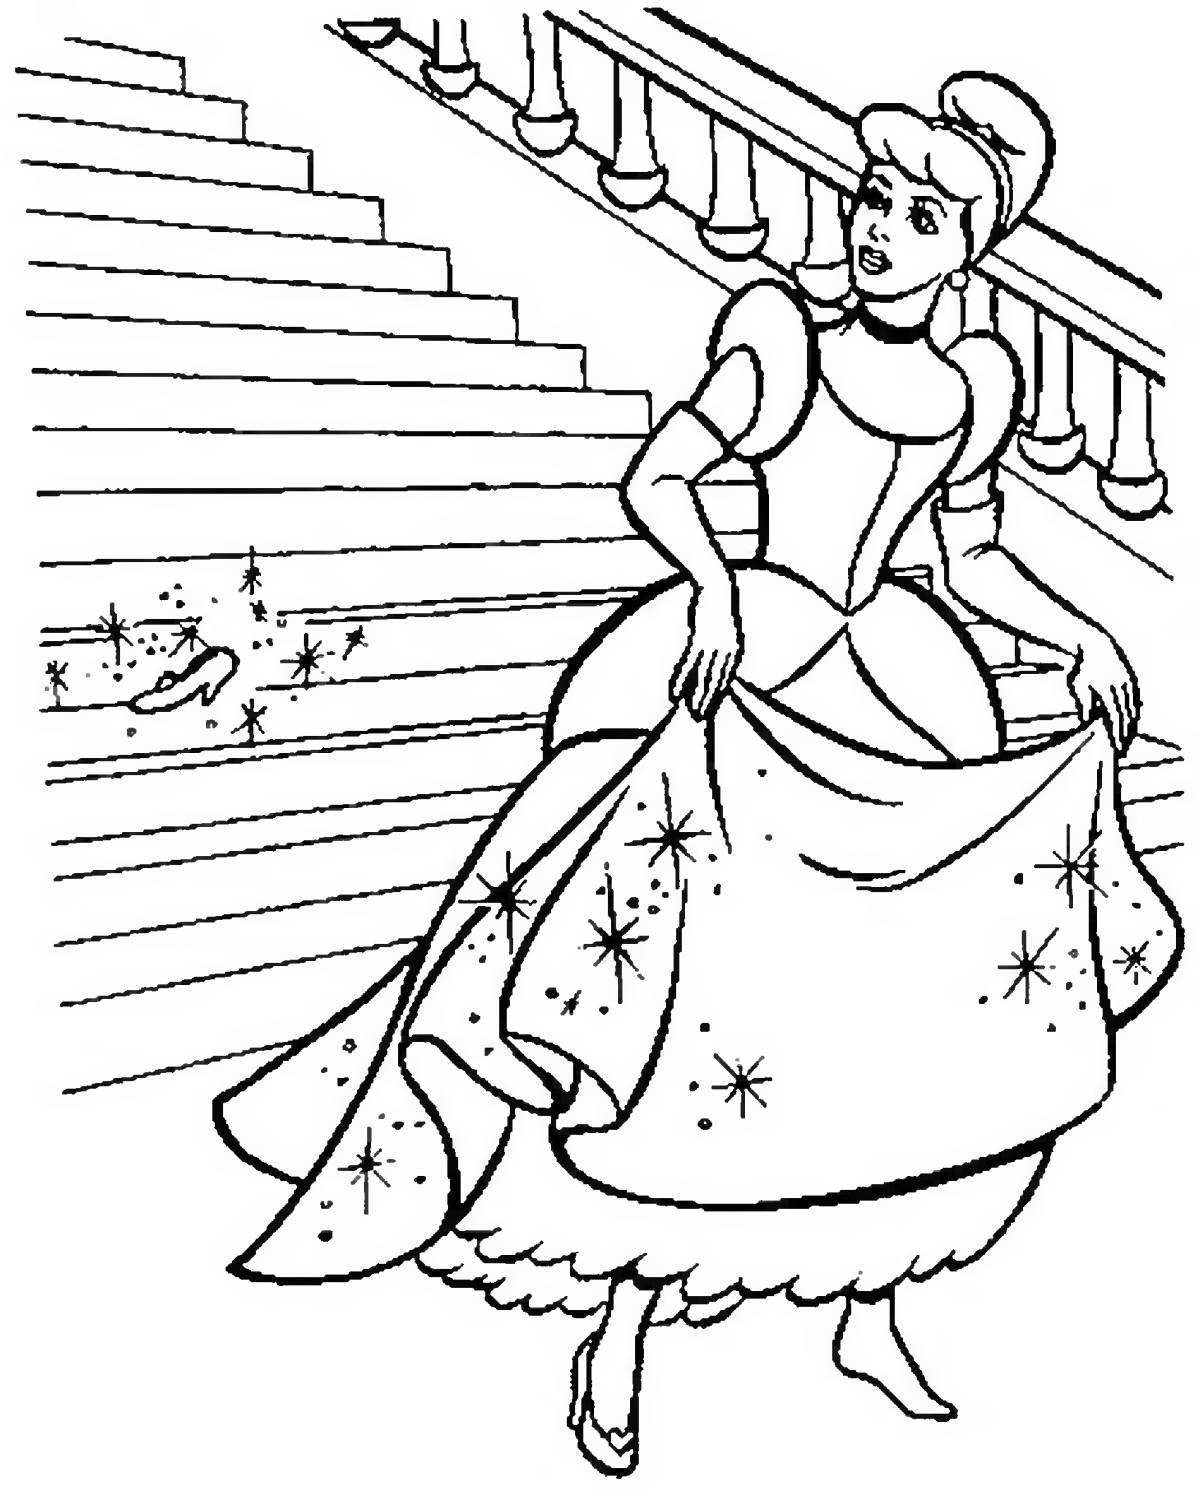 Awesome Soviet Cinderella coloring book